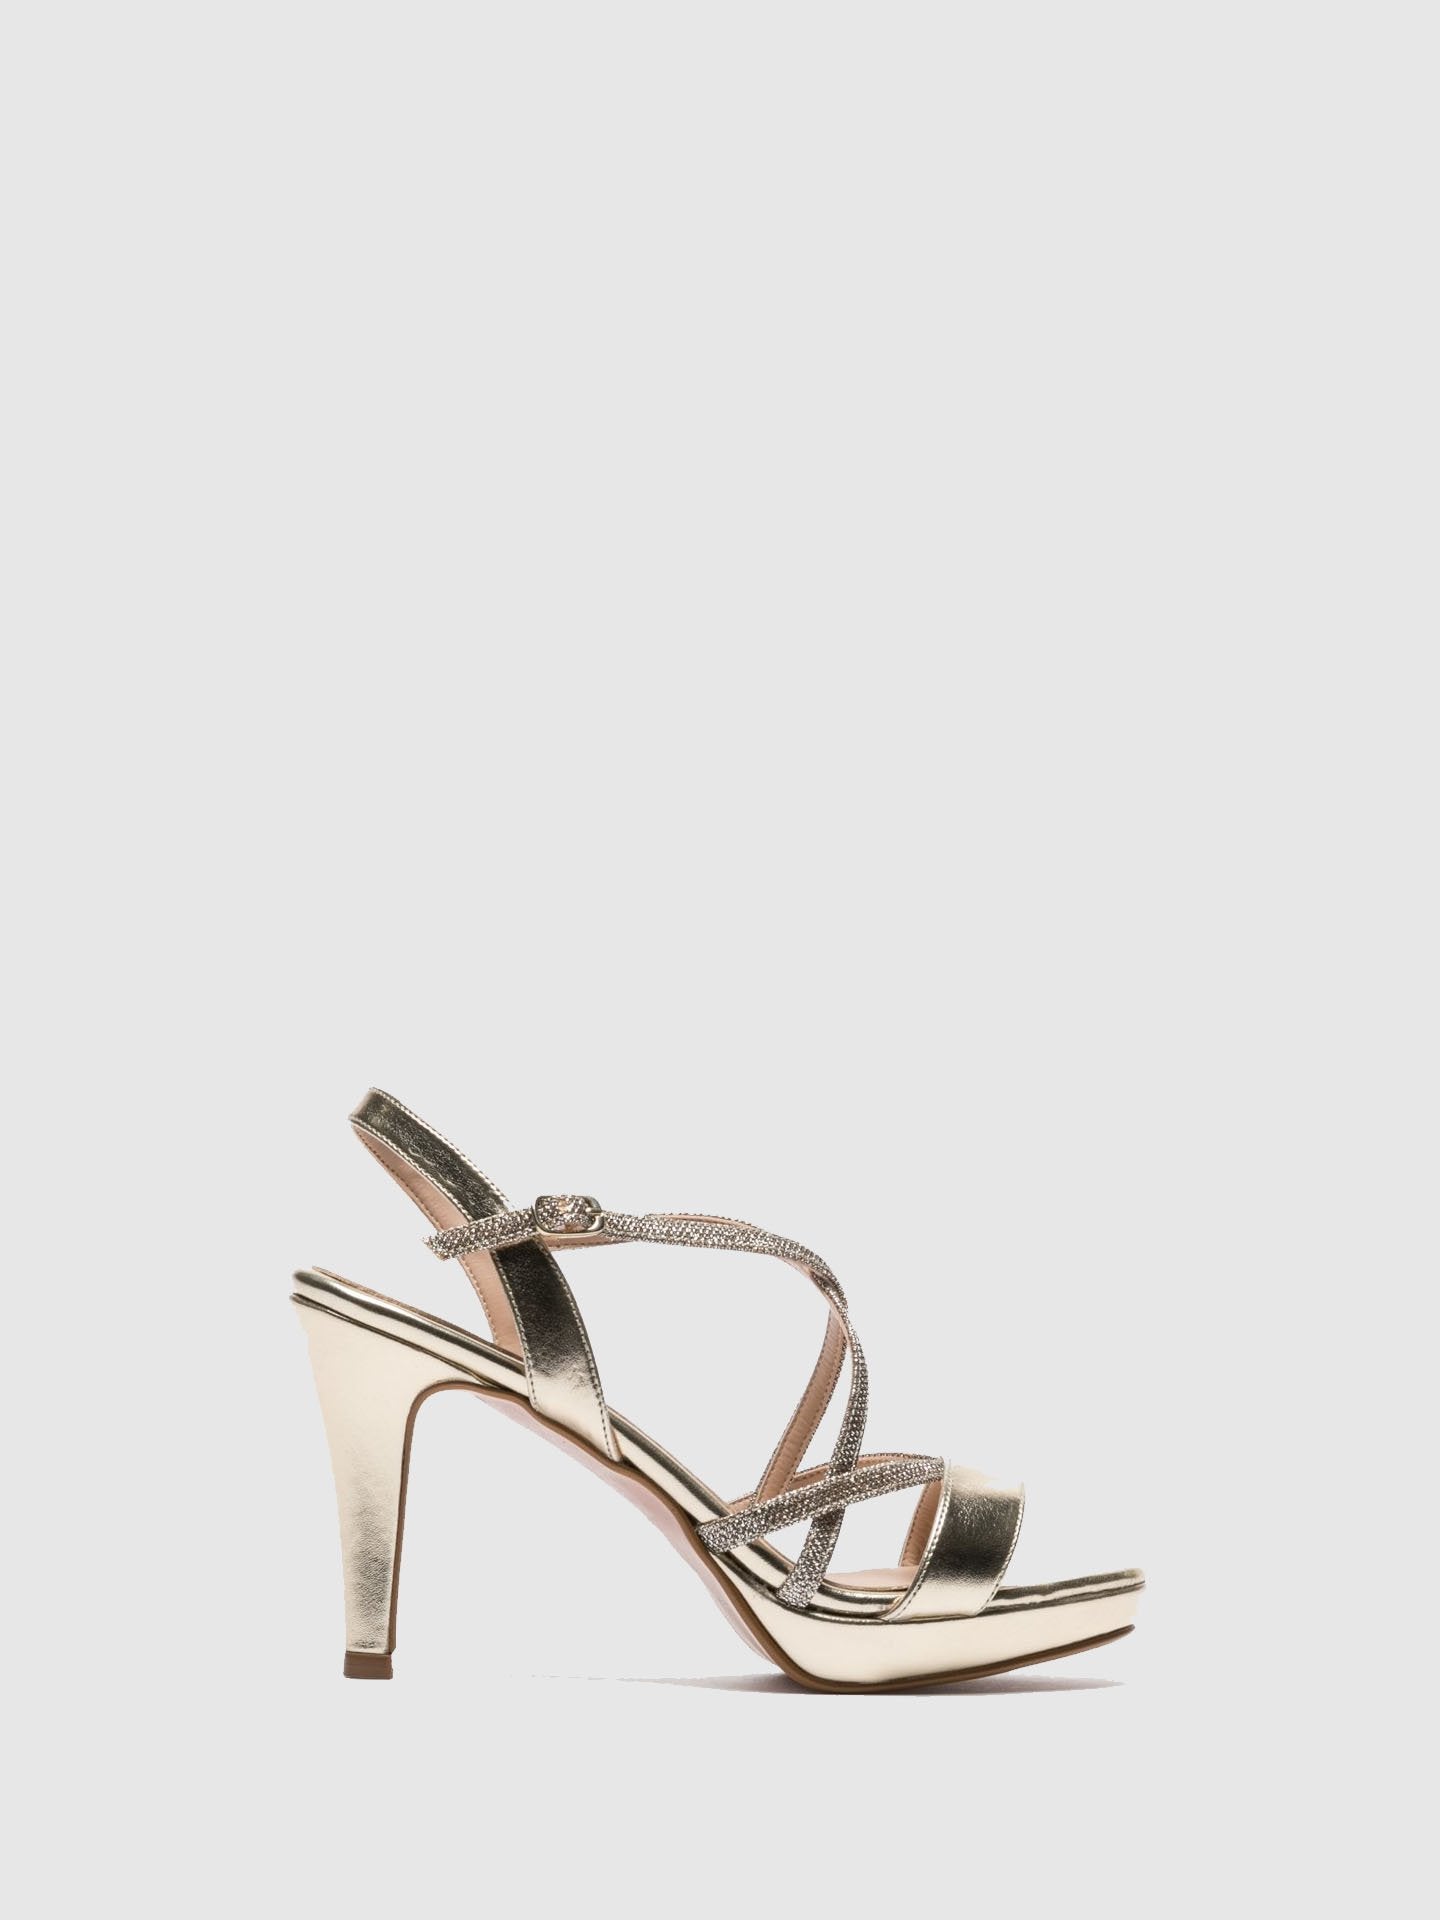 Foreva Gold Strappy Sandals